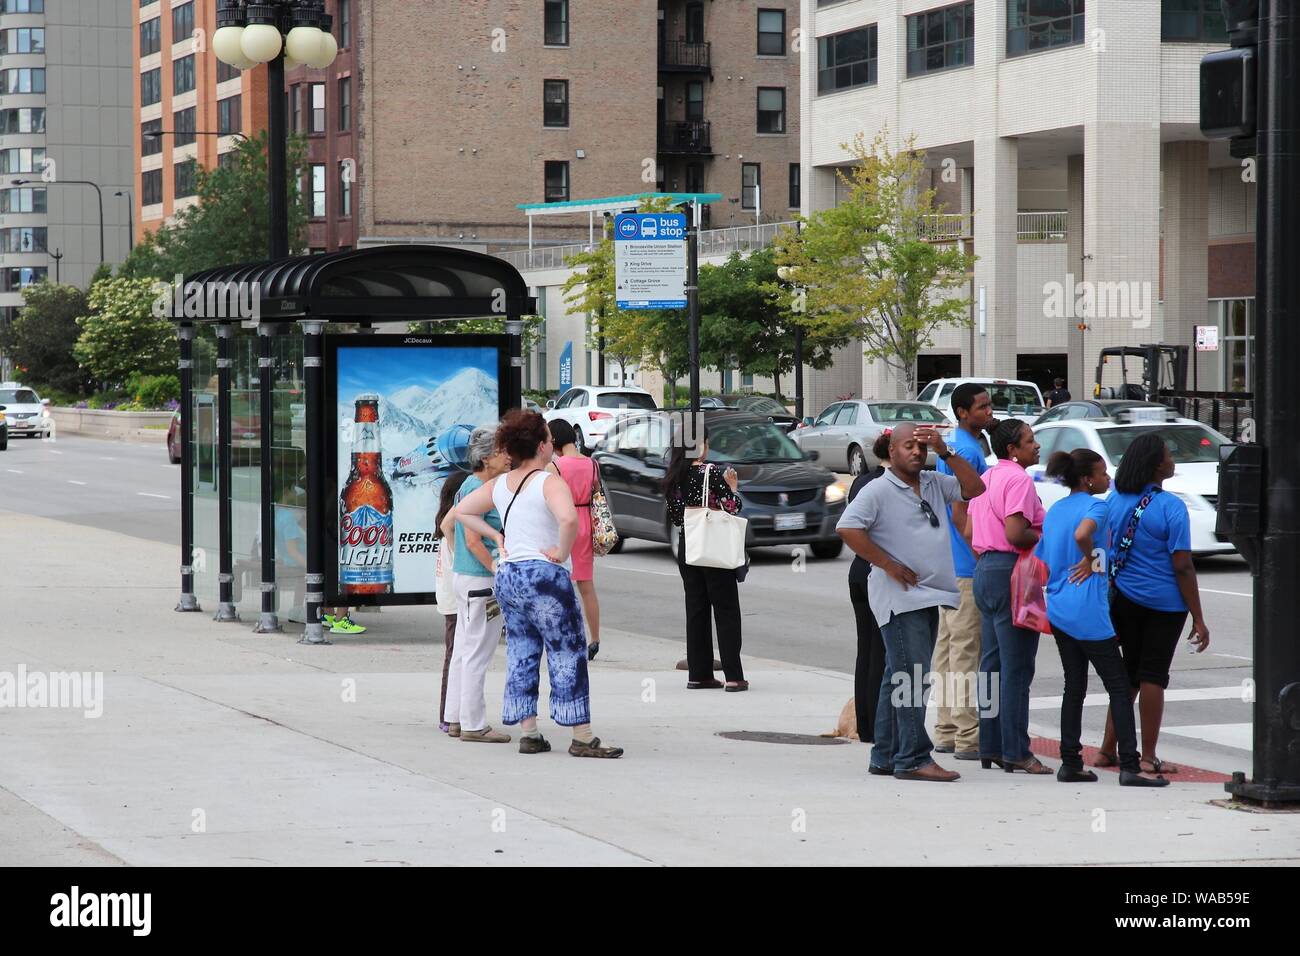 CHICAGO, USA - JUNE 27, 2013: People wait at a bus stop in Chicago. Chicago is the 3rd most populous US city with 2.7 million residents (8.7 million i Stock Photo